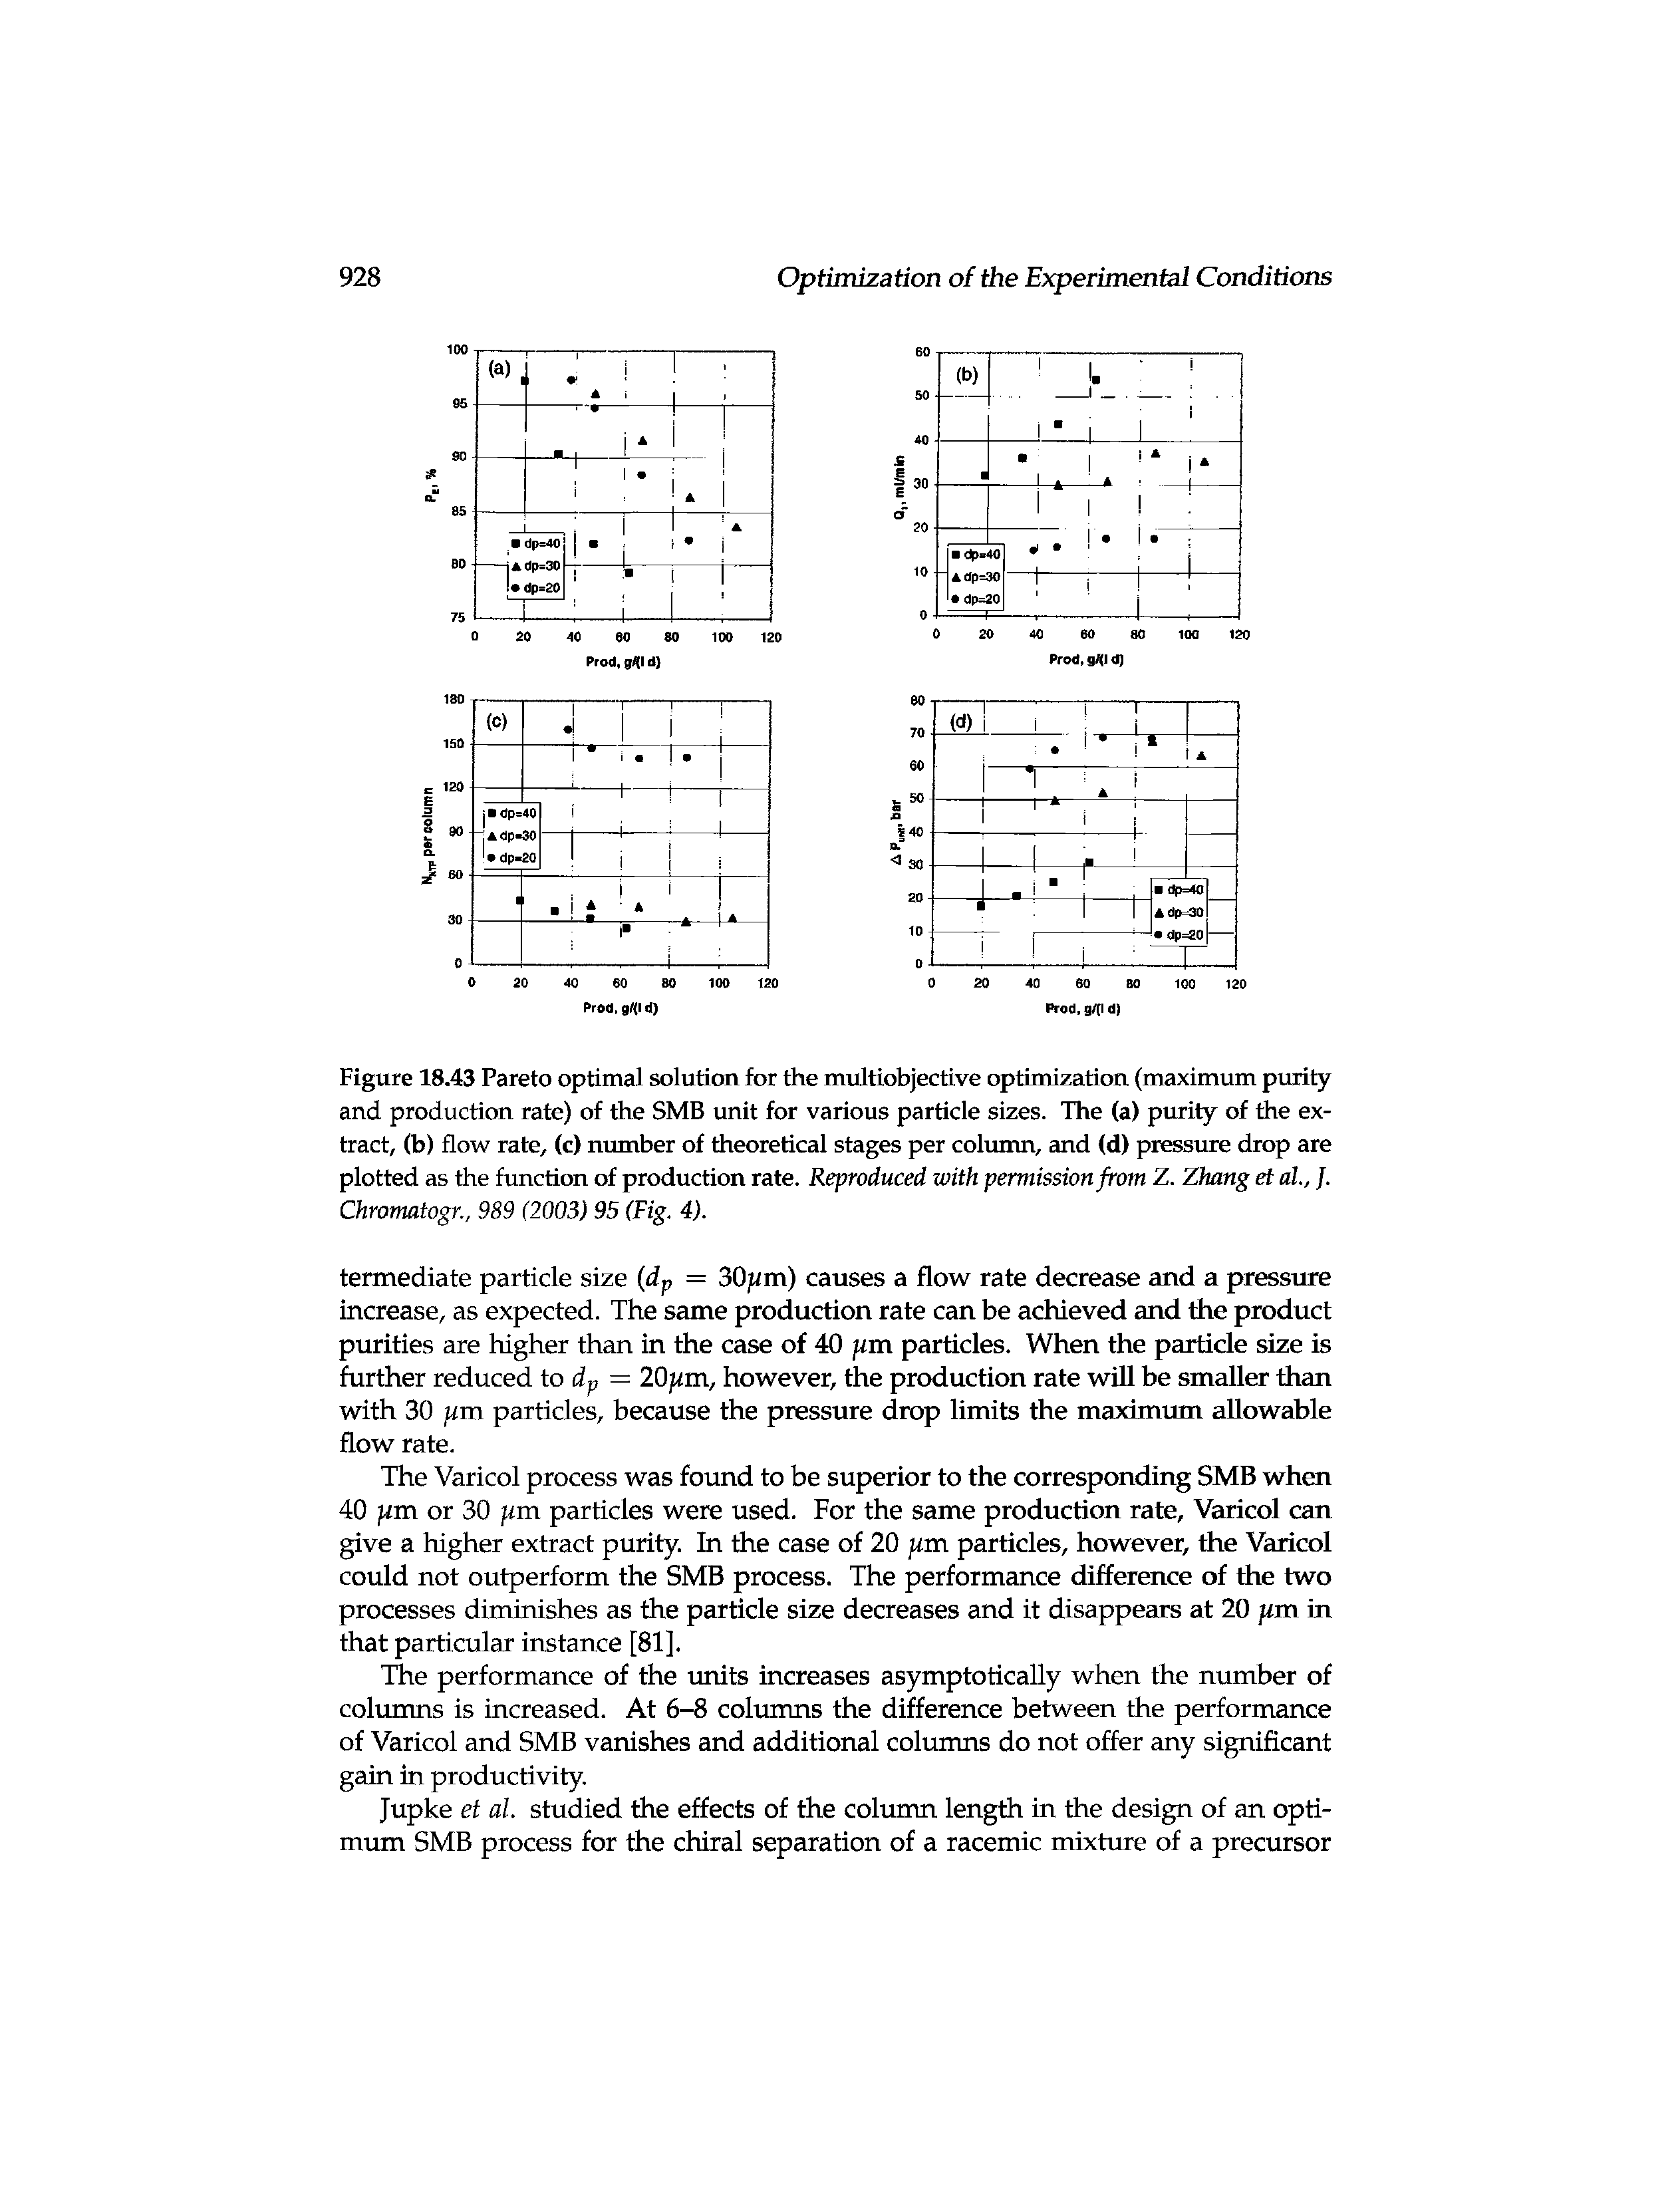 Figure 18.43 Pareto optimal solution for the multiobjective optimization (maximum purity and production rate) of the SMB unit for various particle sizes. The (a) purity of the extract, (b) flow rate, (c) number of theoretical stages per column, and (d) pressure drop are plotted as the function of production rate. Reproduced with permission from Z. Zhang et ah,. Chromatogr., 989 (2003) 95 (Fig. 4).